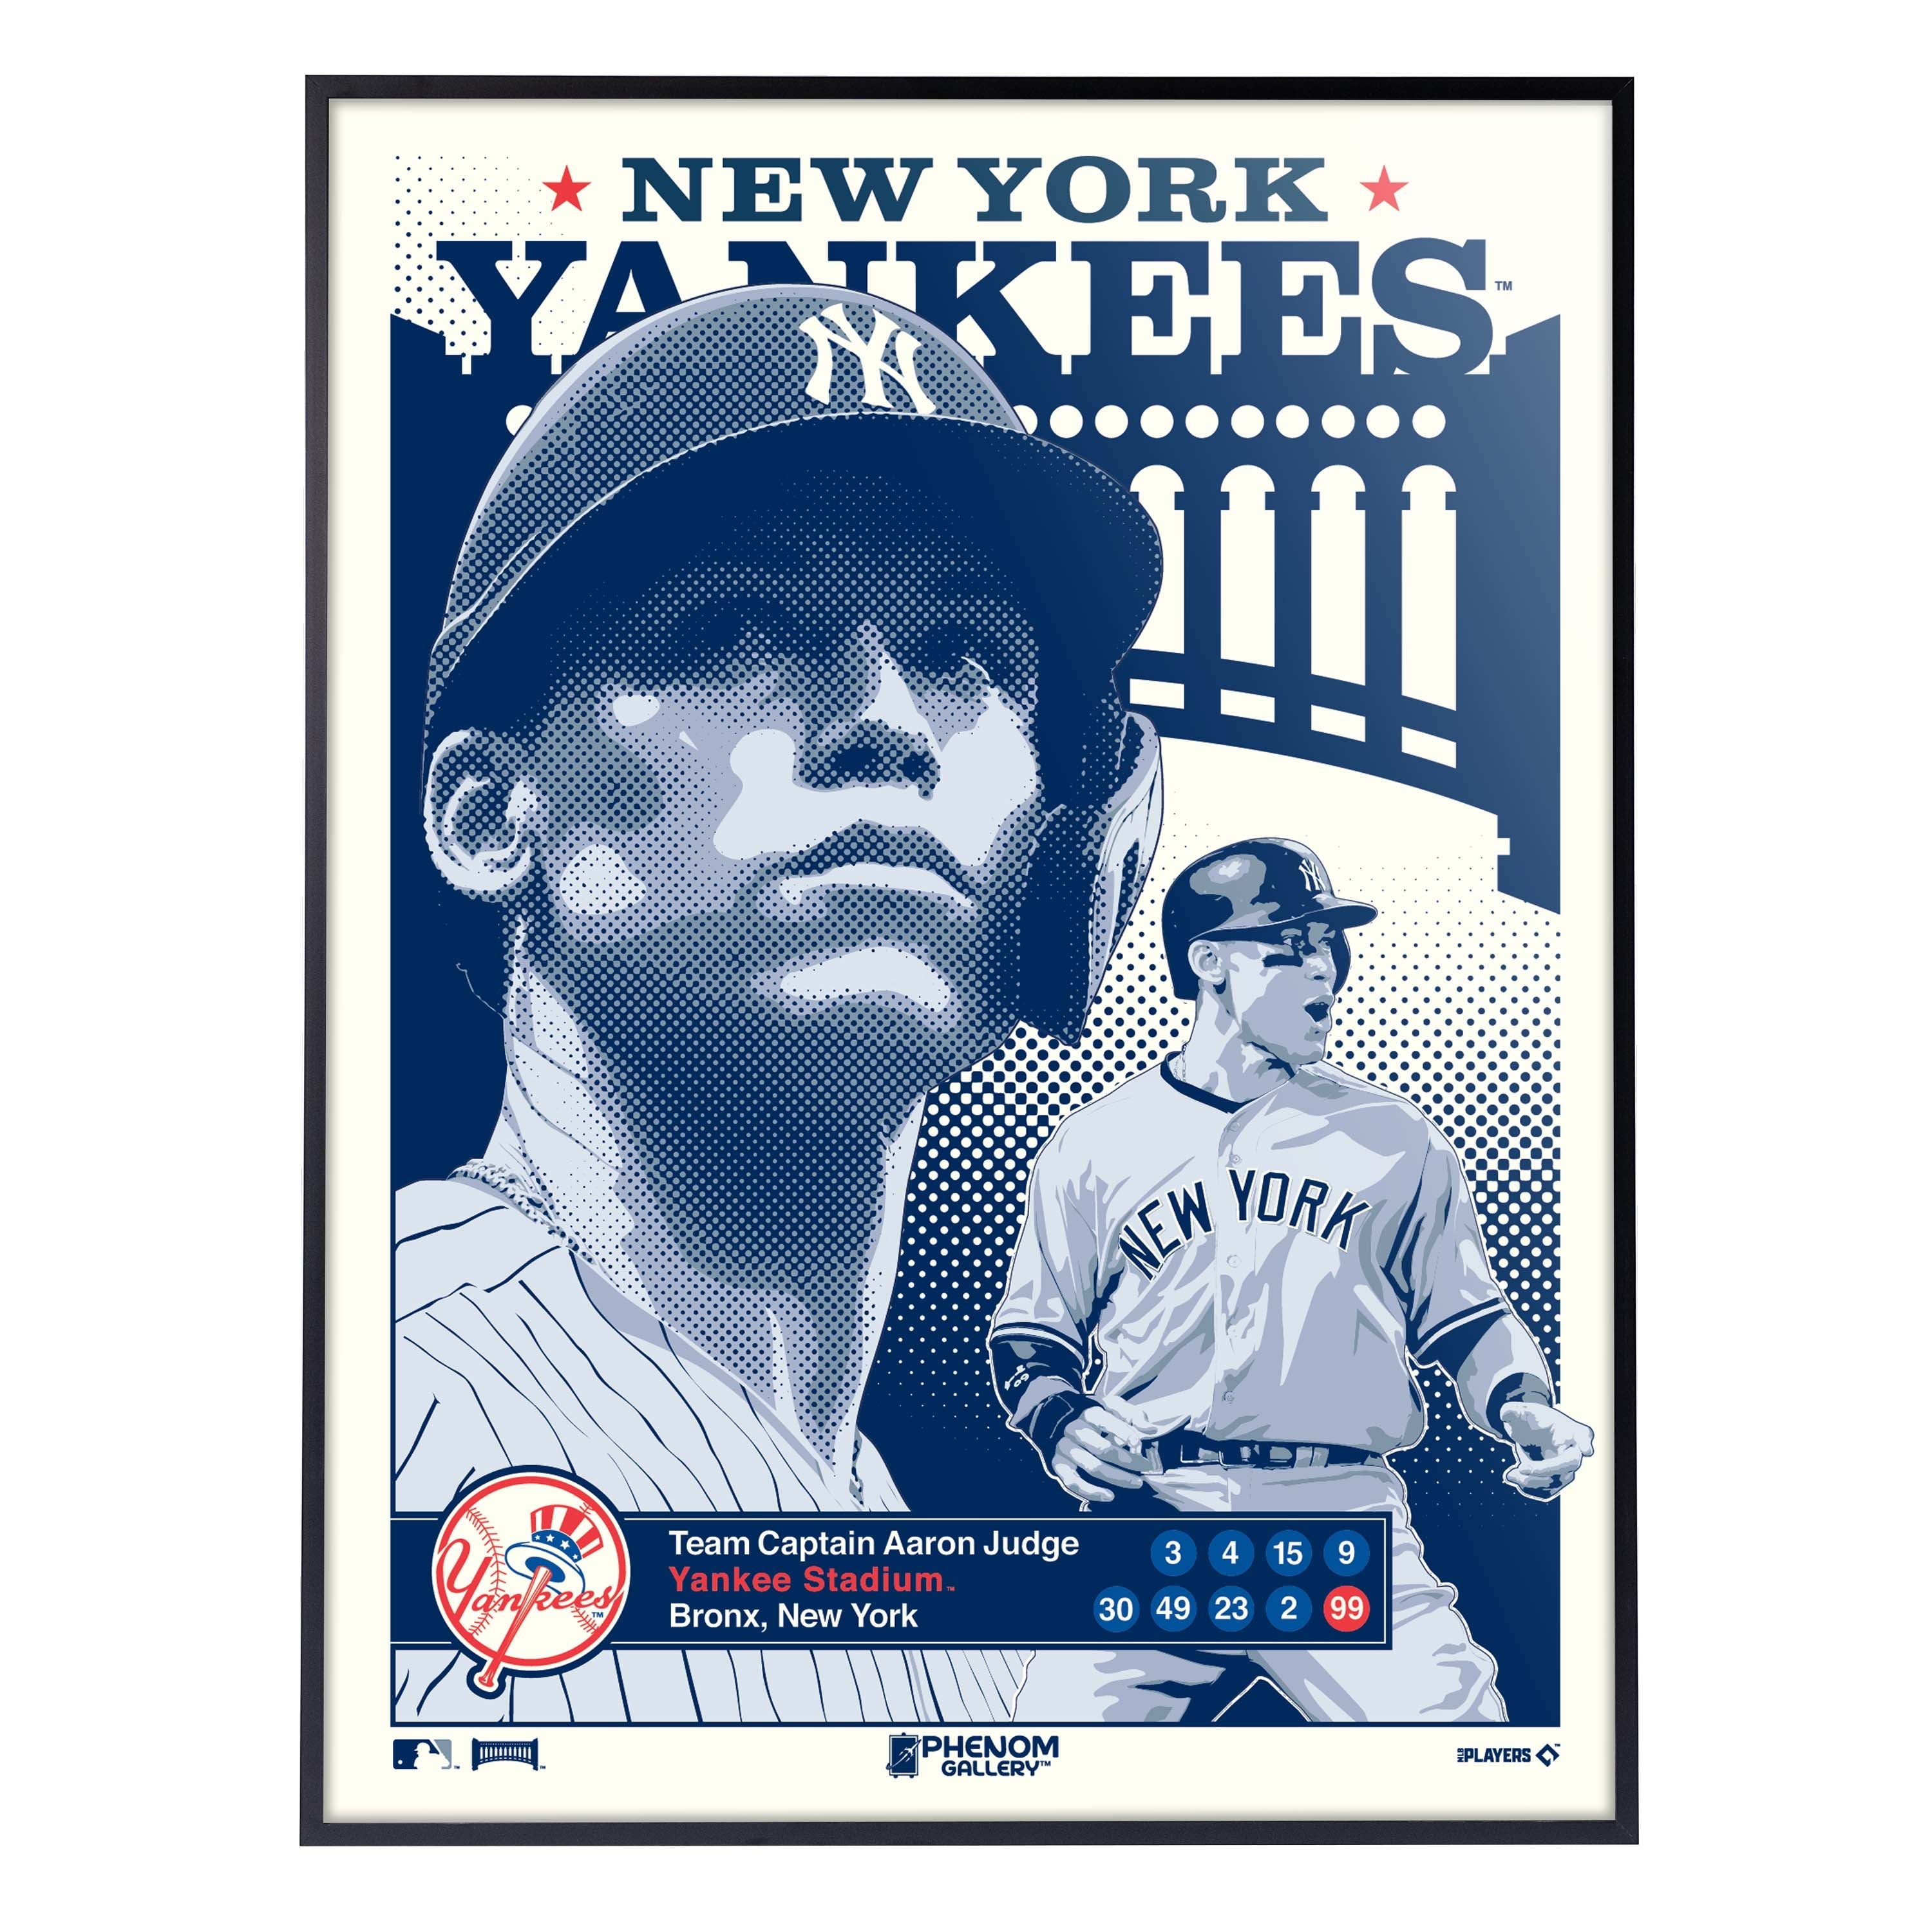 New York Mets Pete Alonso '19 Rookie of the Year 18x24 Serigraph